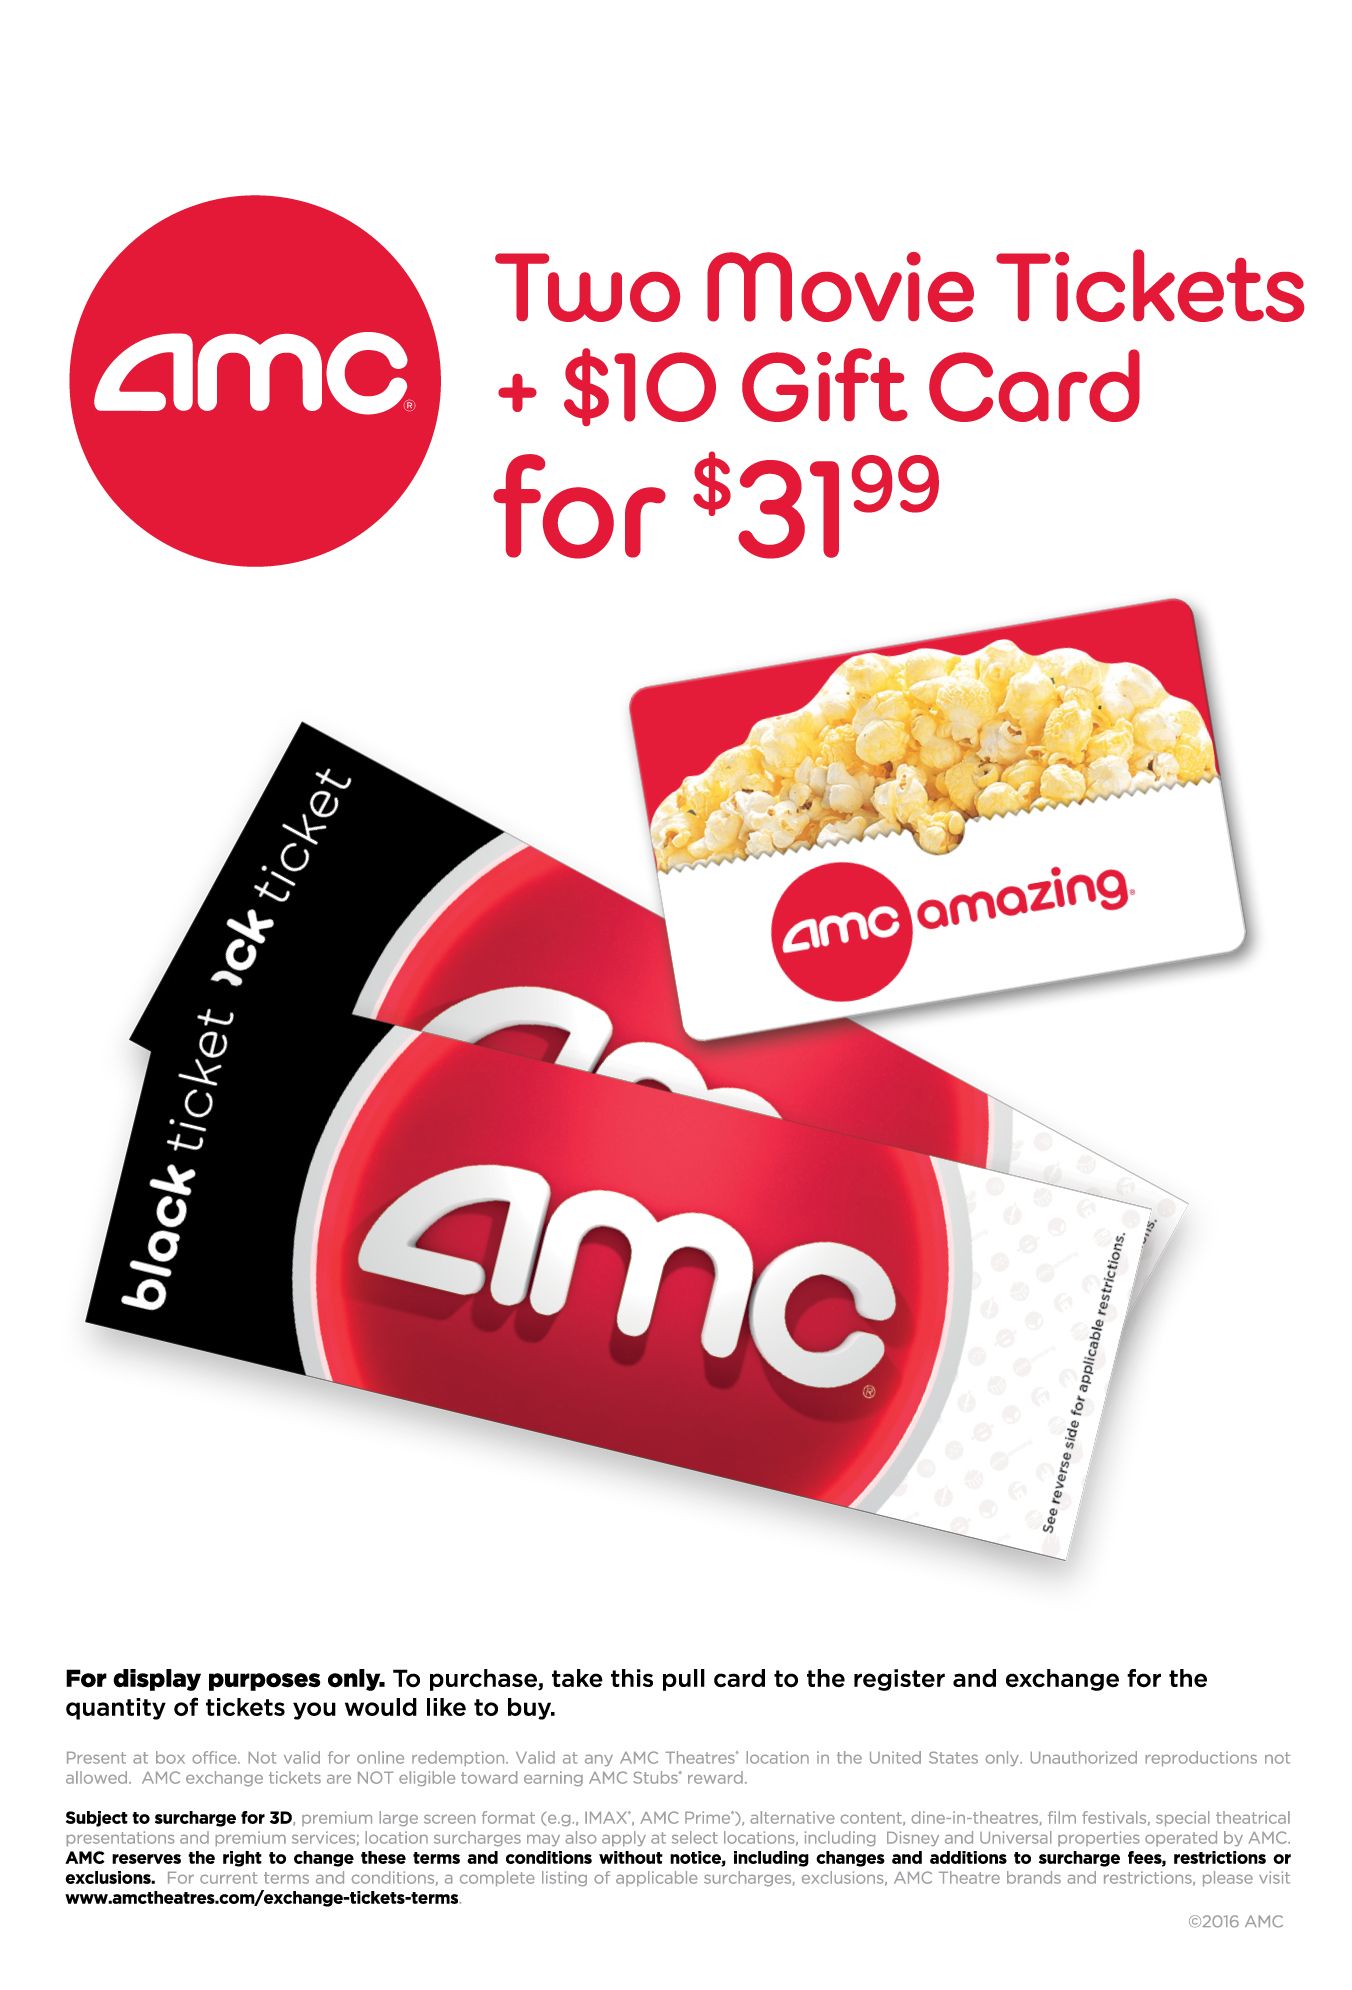 AMC Theatres - movie times, movie trailers, buy tickets and gift cards.